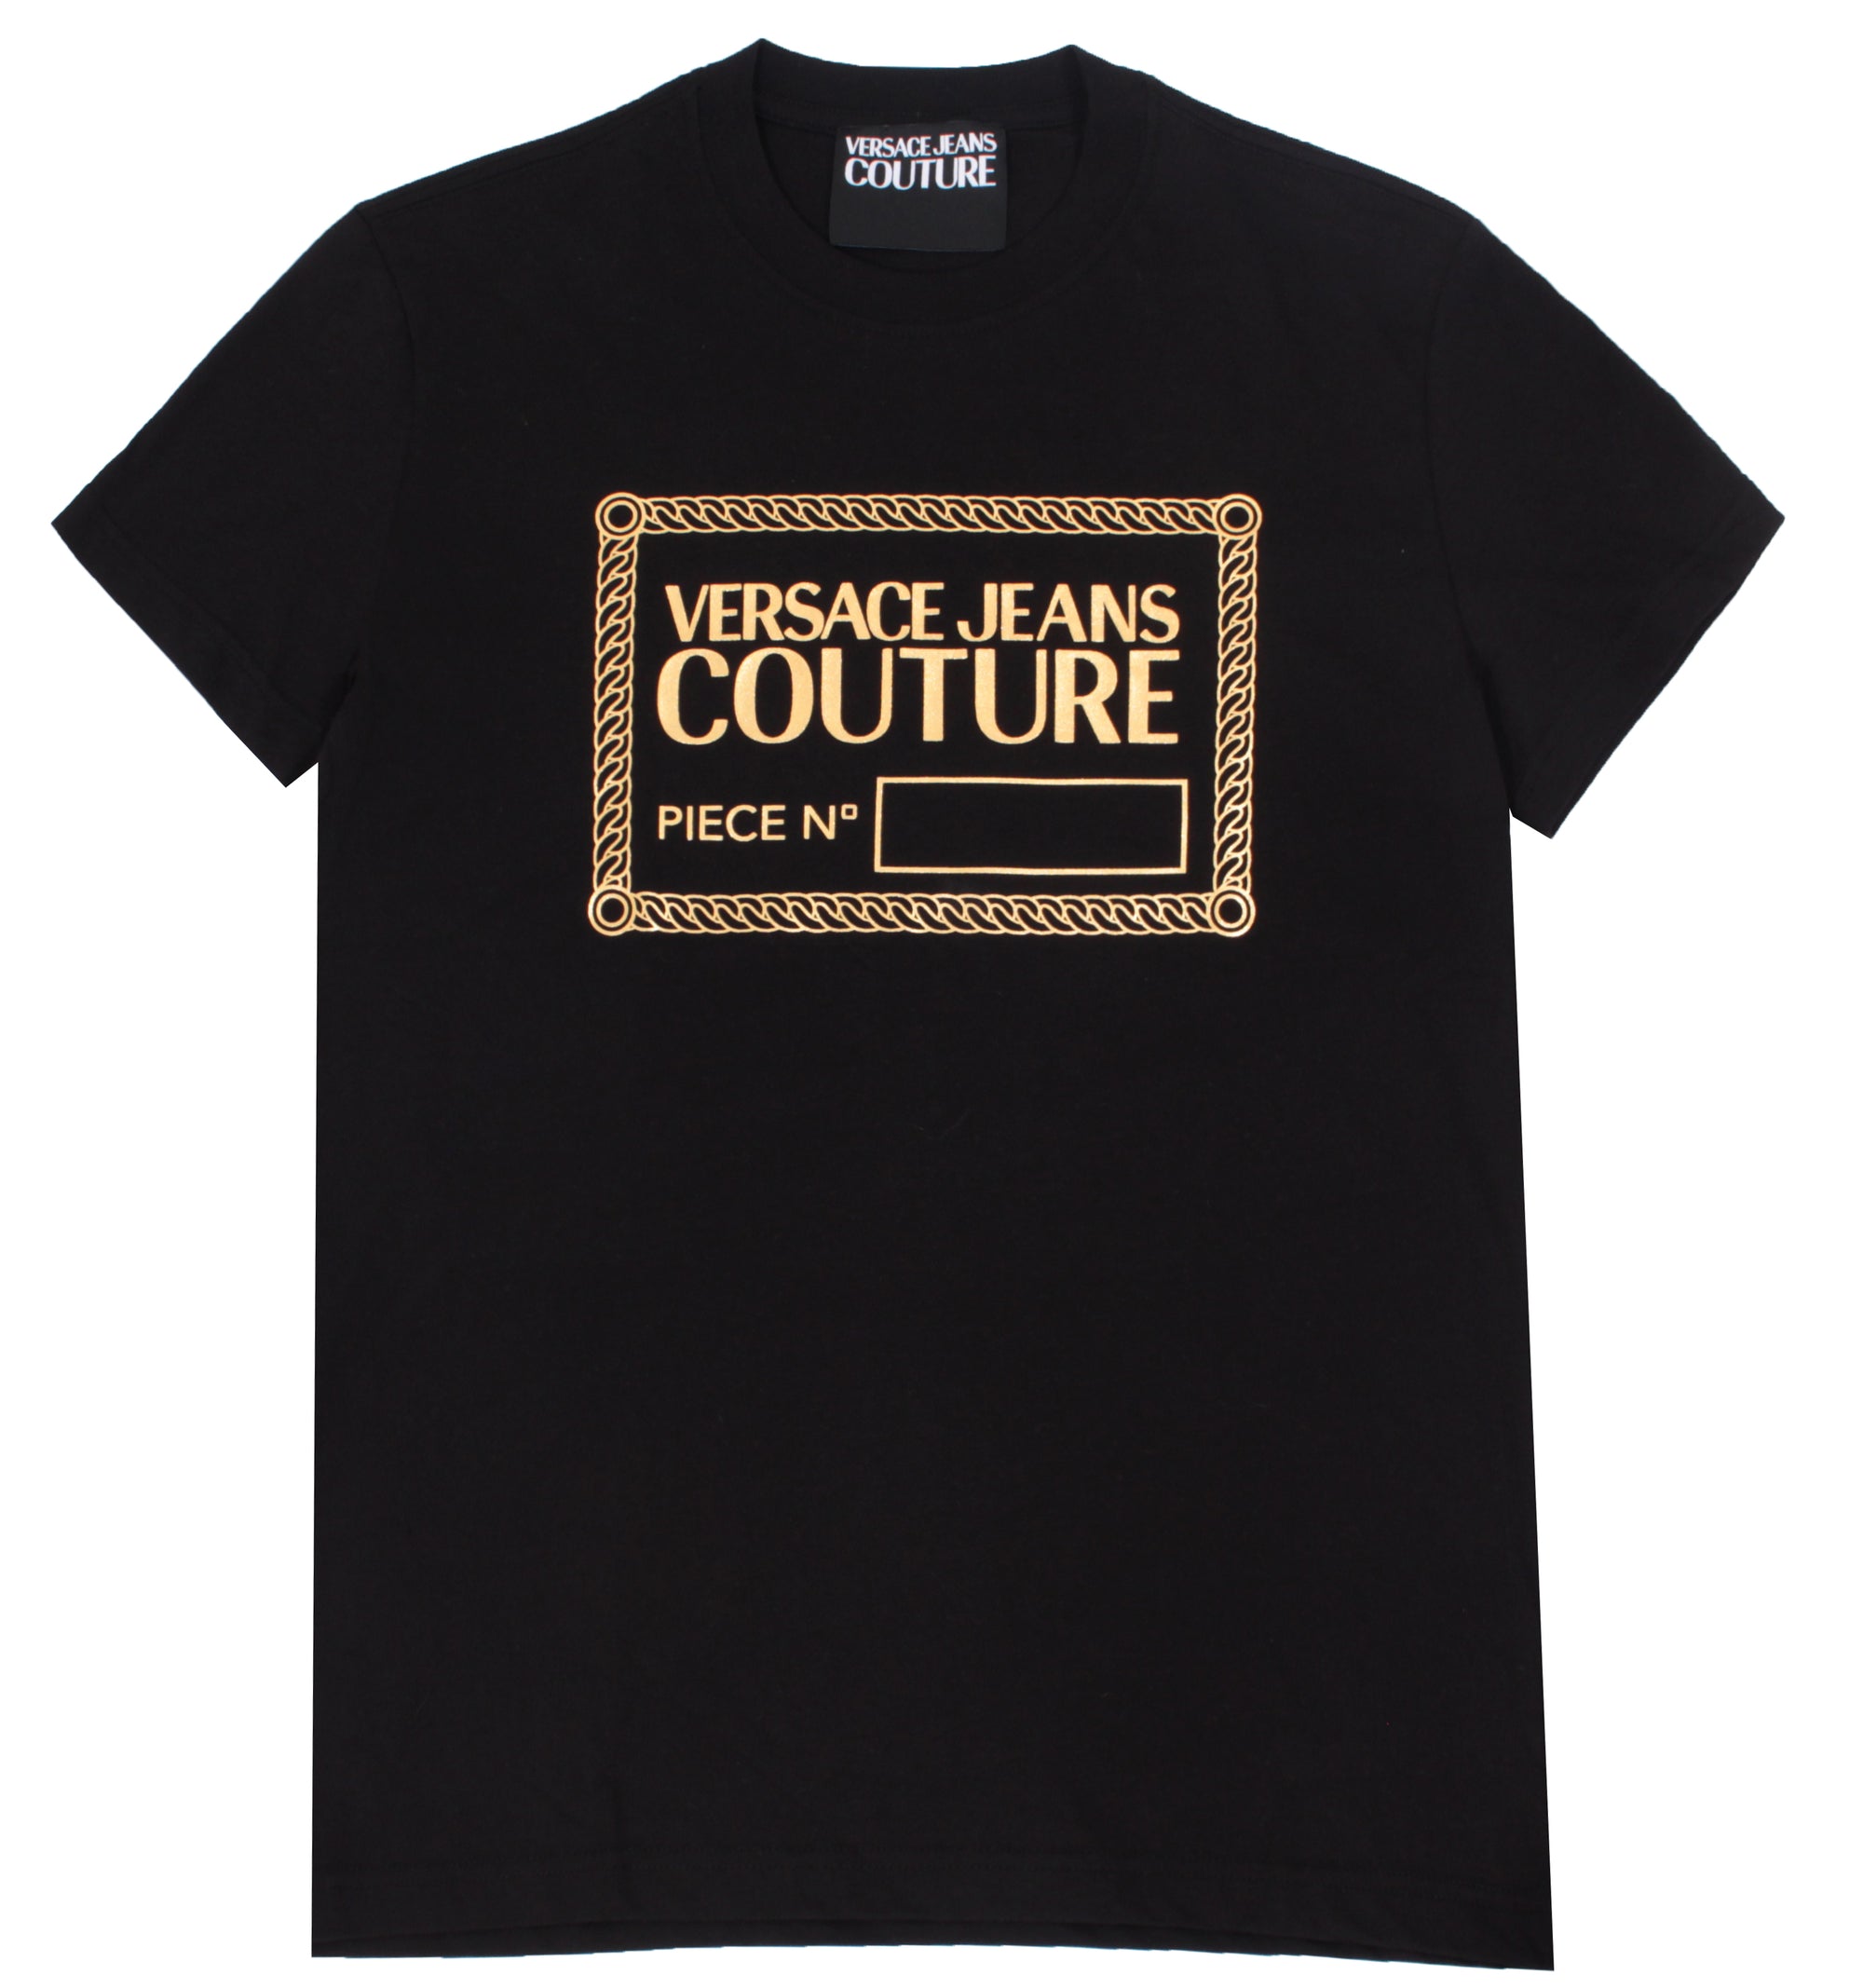 Versace Jeans Couture Logo Tee - Black & Gold